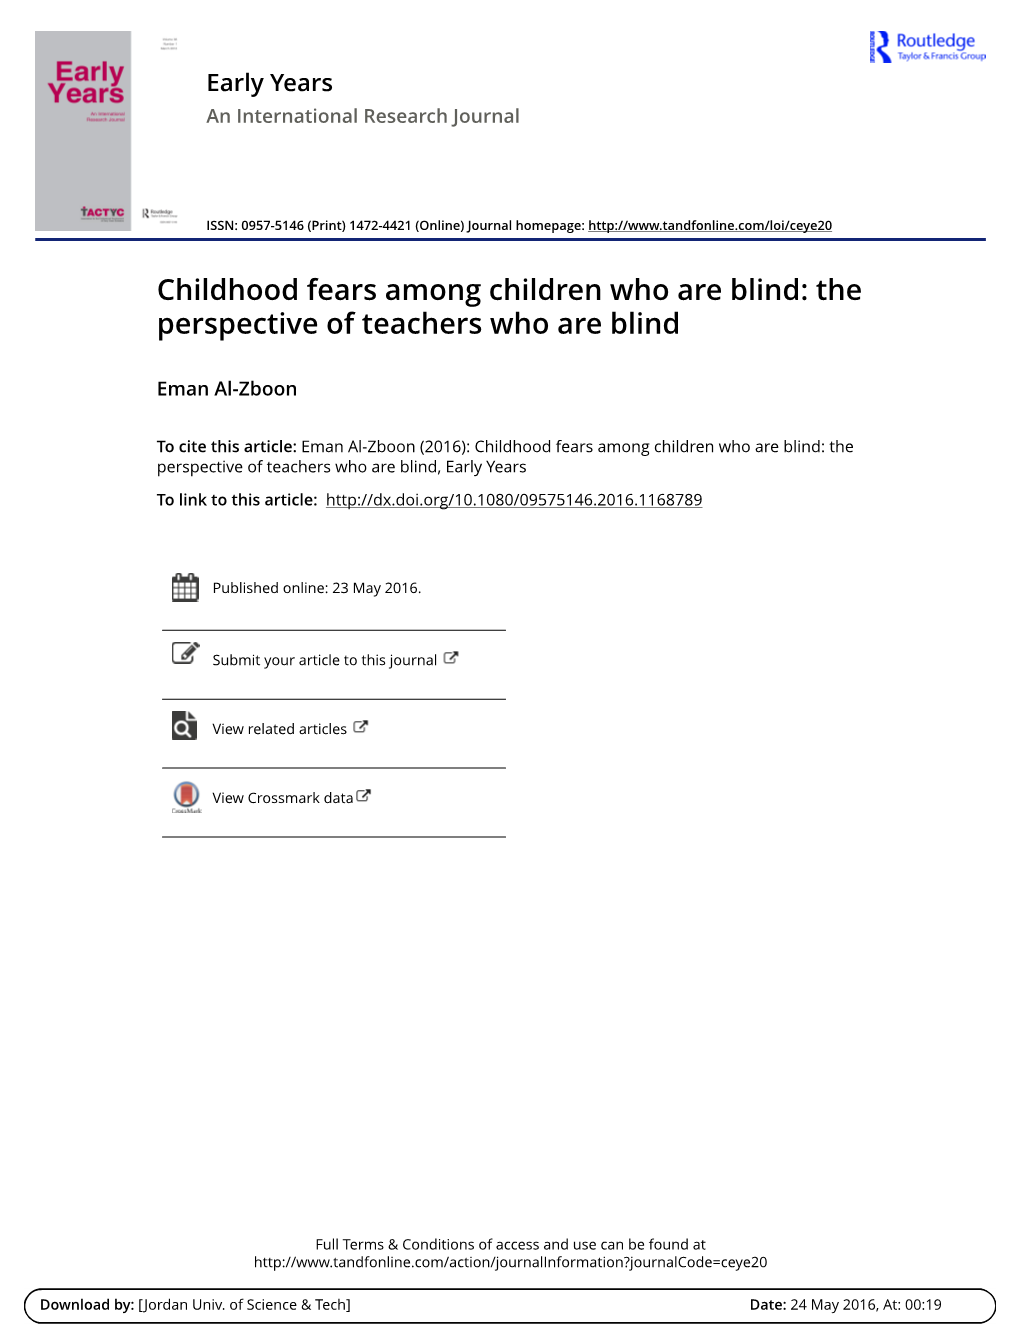 Childhood Fears Among Children Who Are Blind: the Perspective of Teachers Who Are Blind